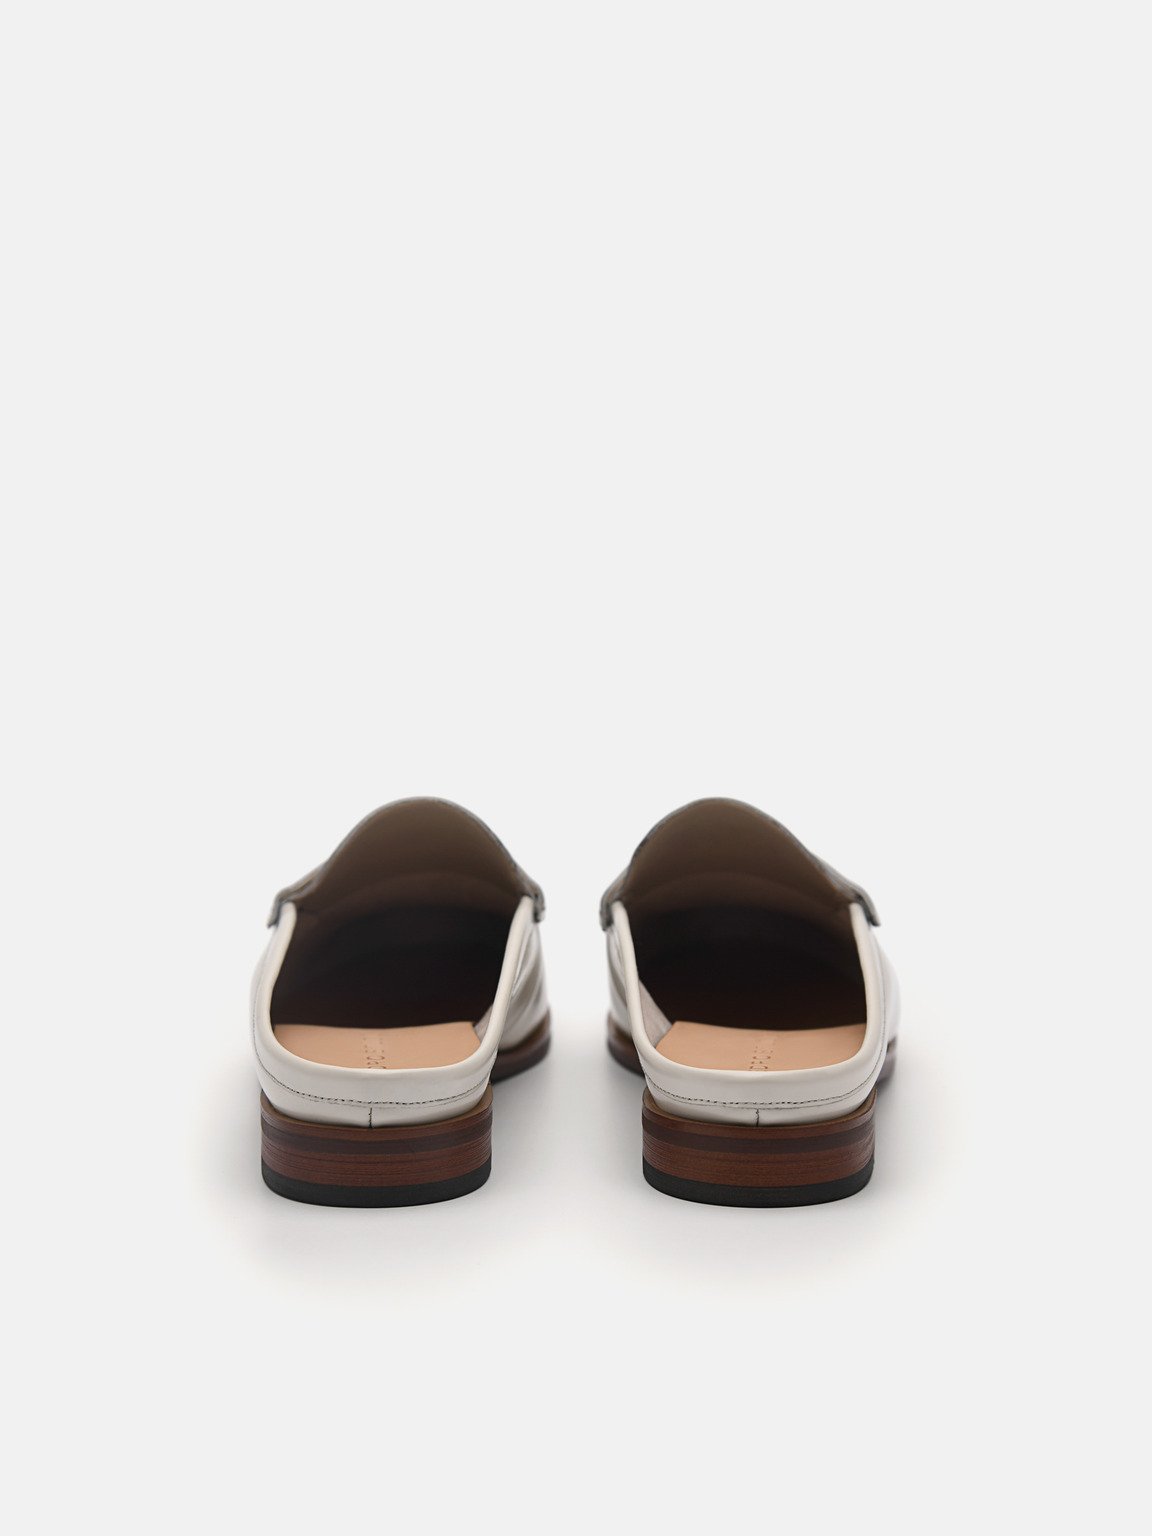 Blake Leather Penny Loafer Mules, Chalk